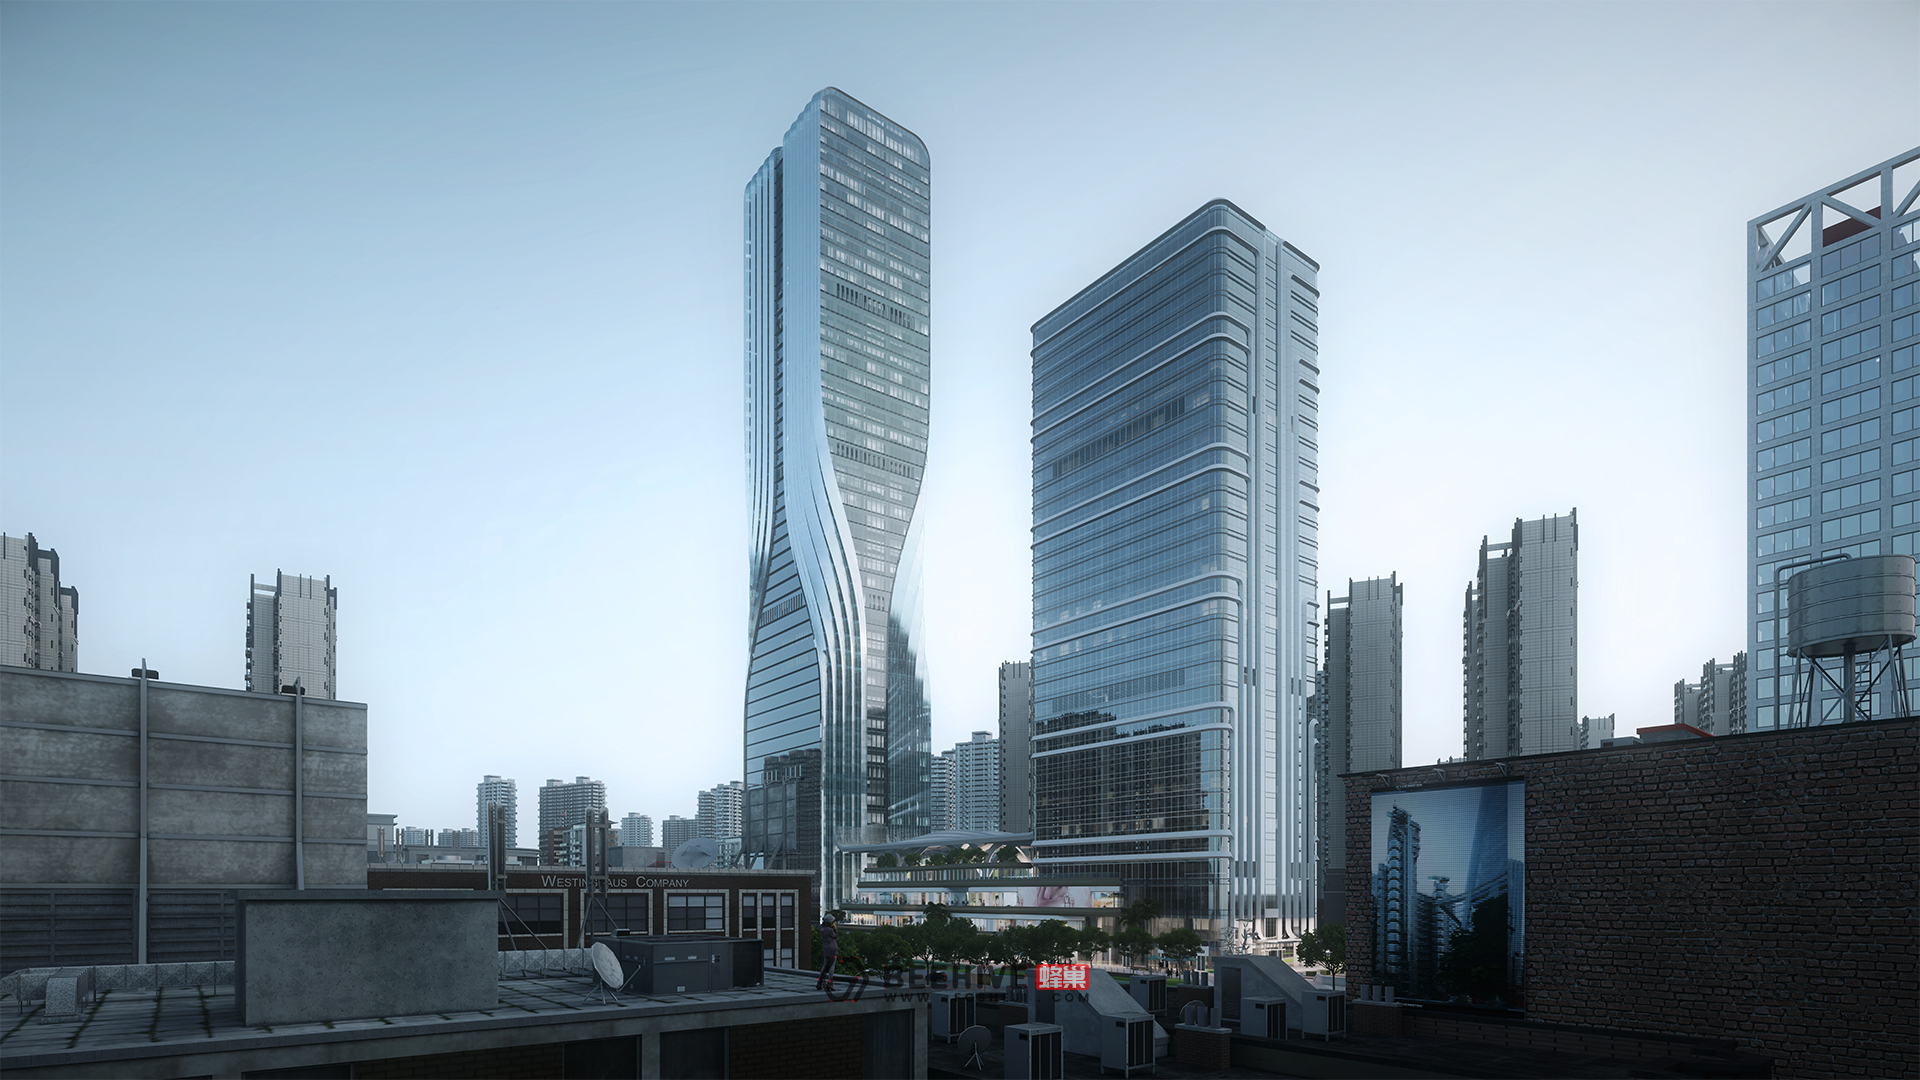 Wuhan Founder International Financial Center. Design and Project Architect: Aedas. Client: PKU Resources.